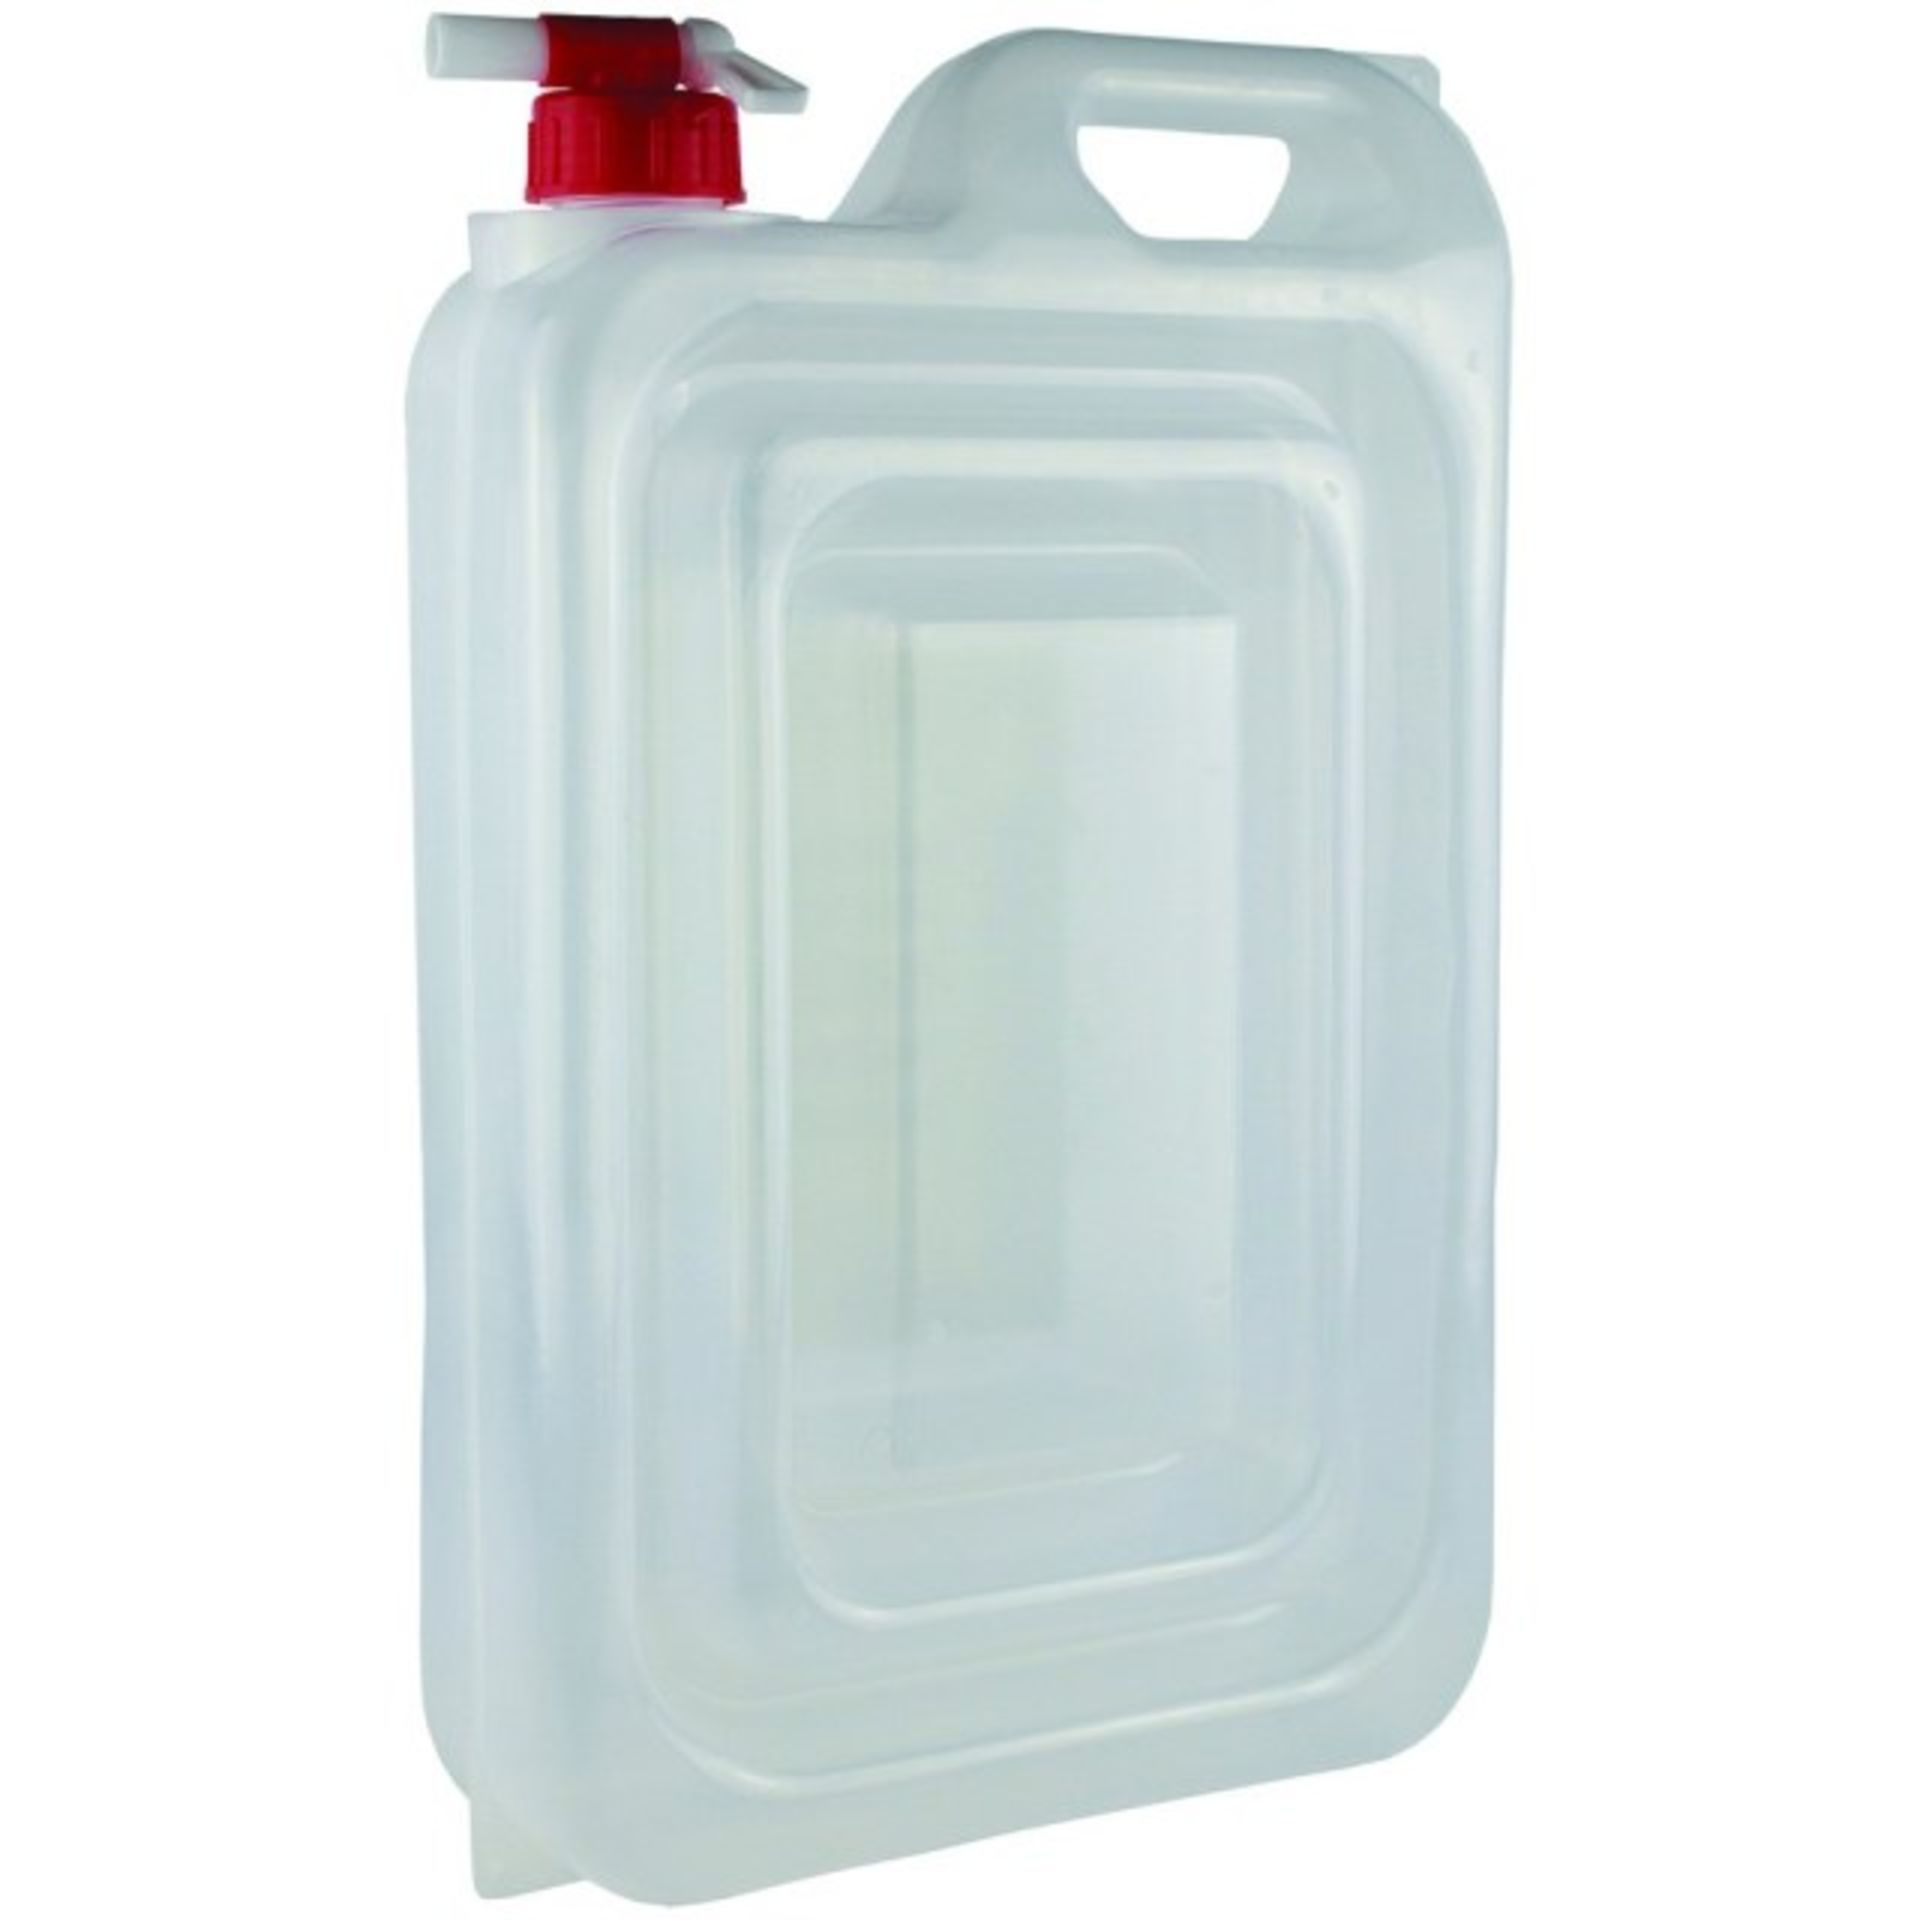 V *TRADE QTY* Brand New 15 Litre Expandable Water Carrier X 20 Bid price to be multiplied by Twenty